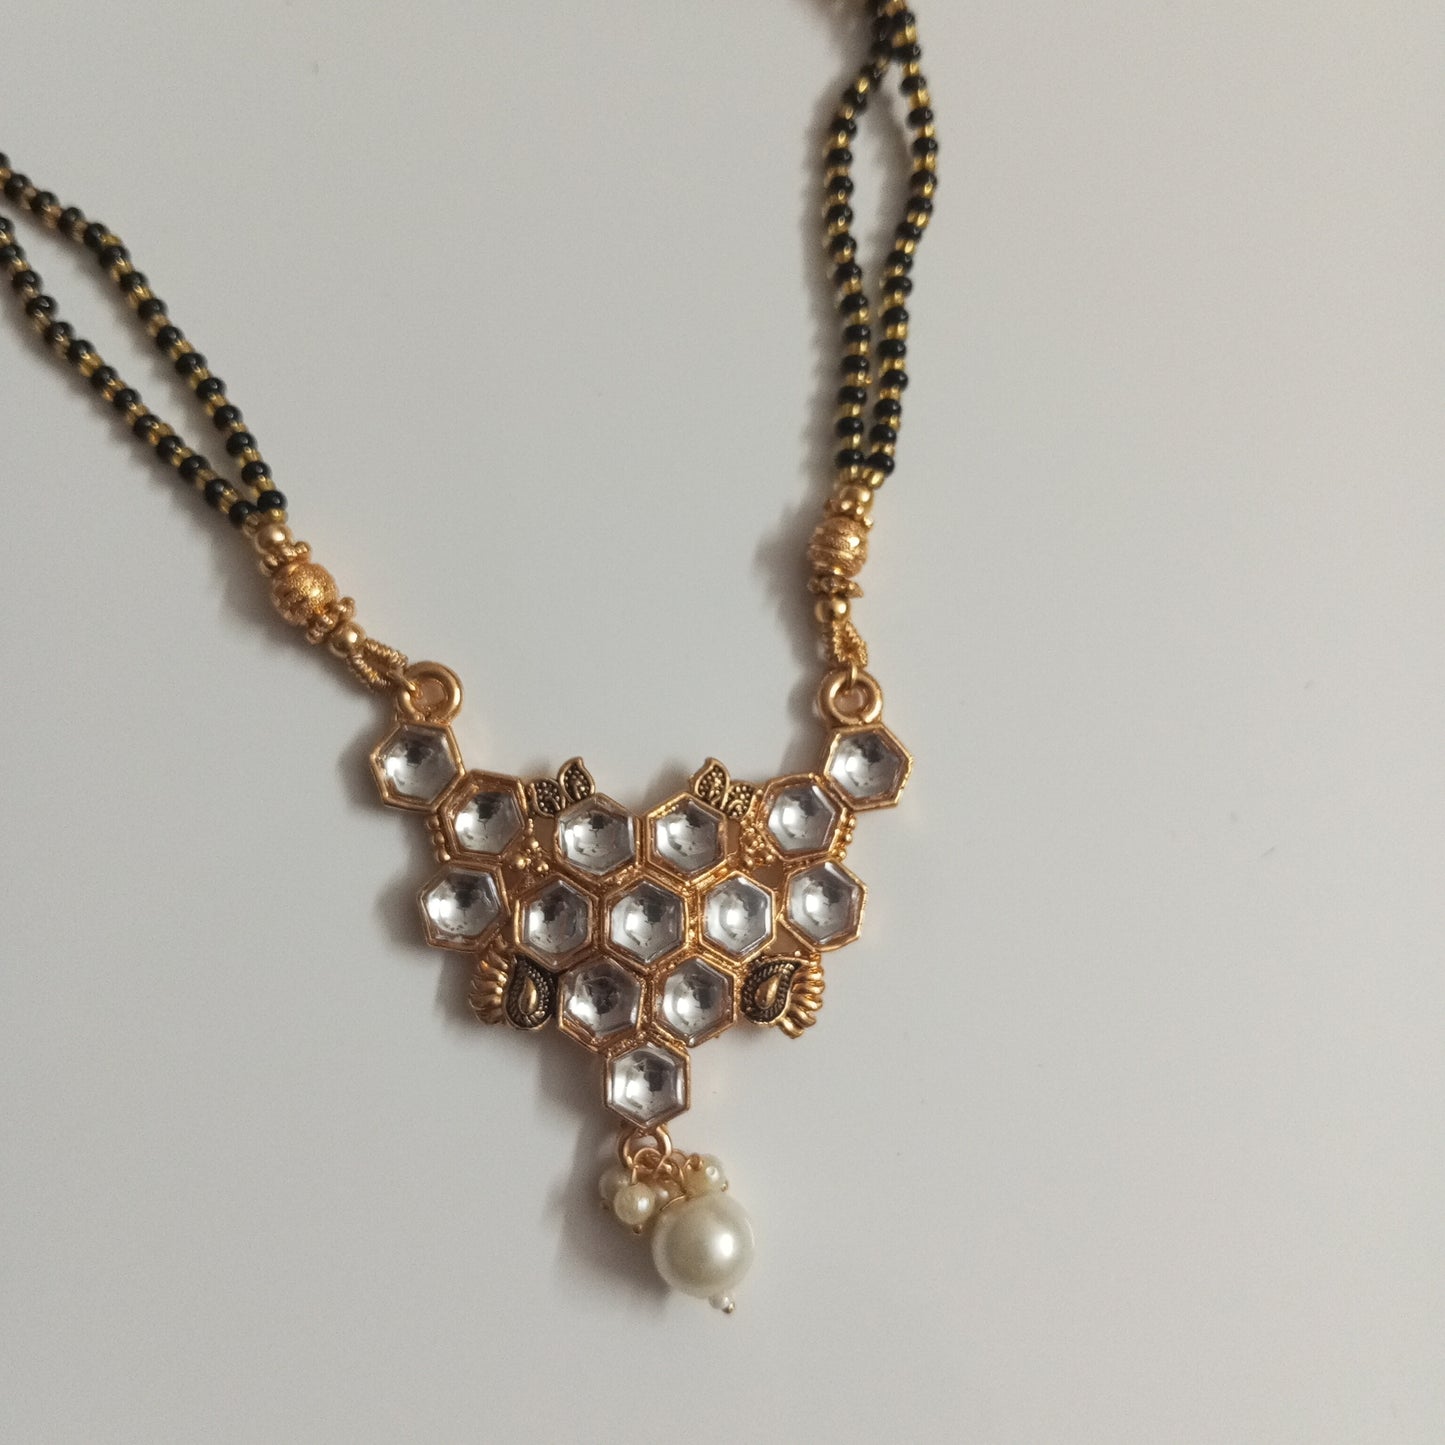 Cz studded Long Mangalsutra with a Hanging Pearl